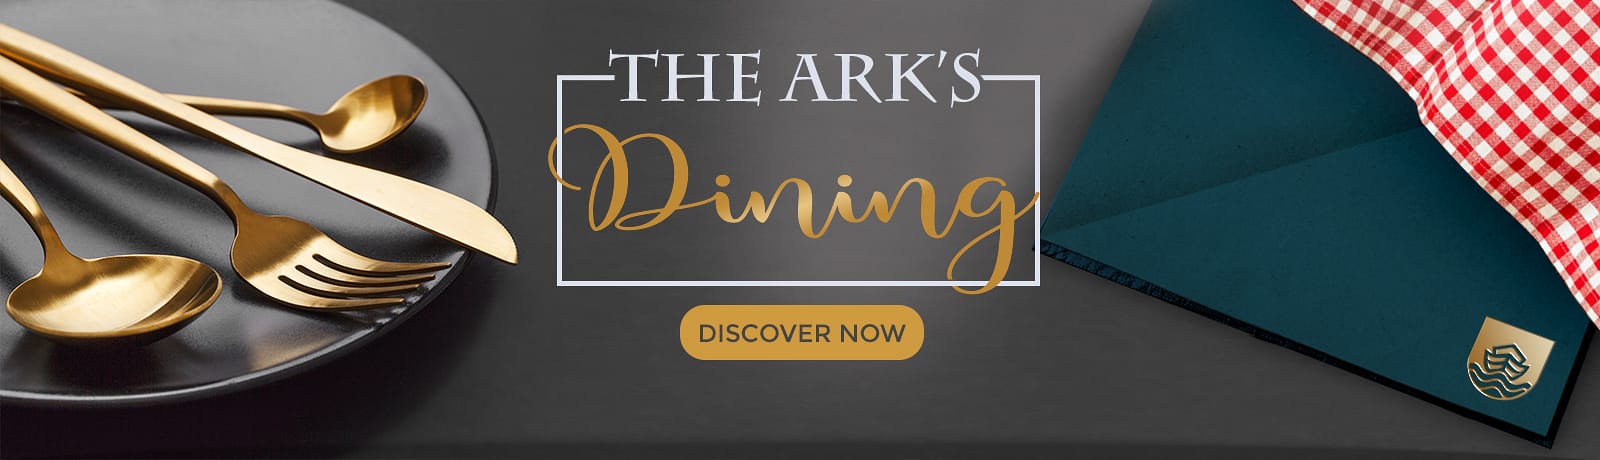 The Ark's Dining